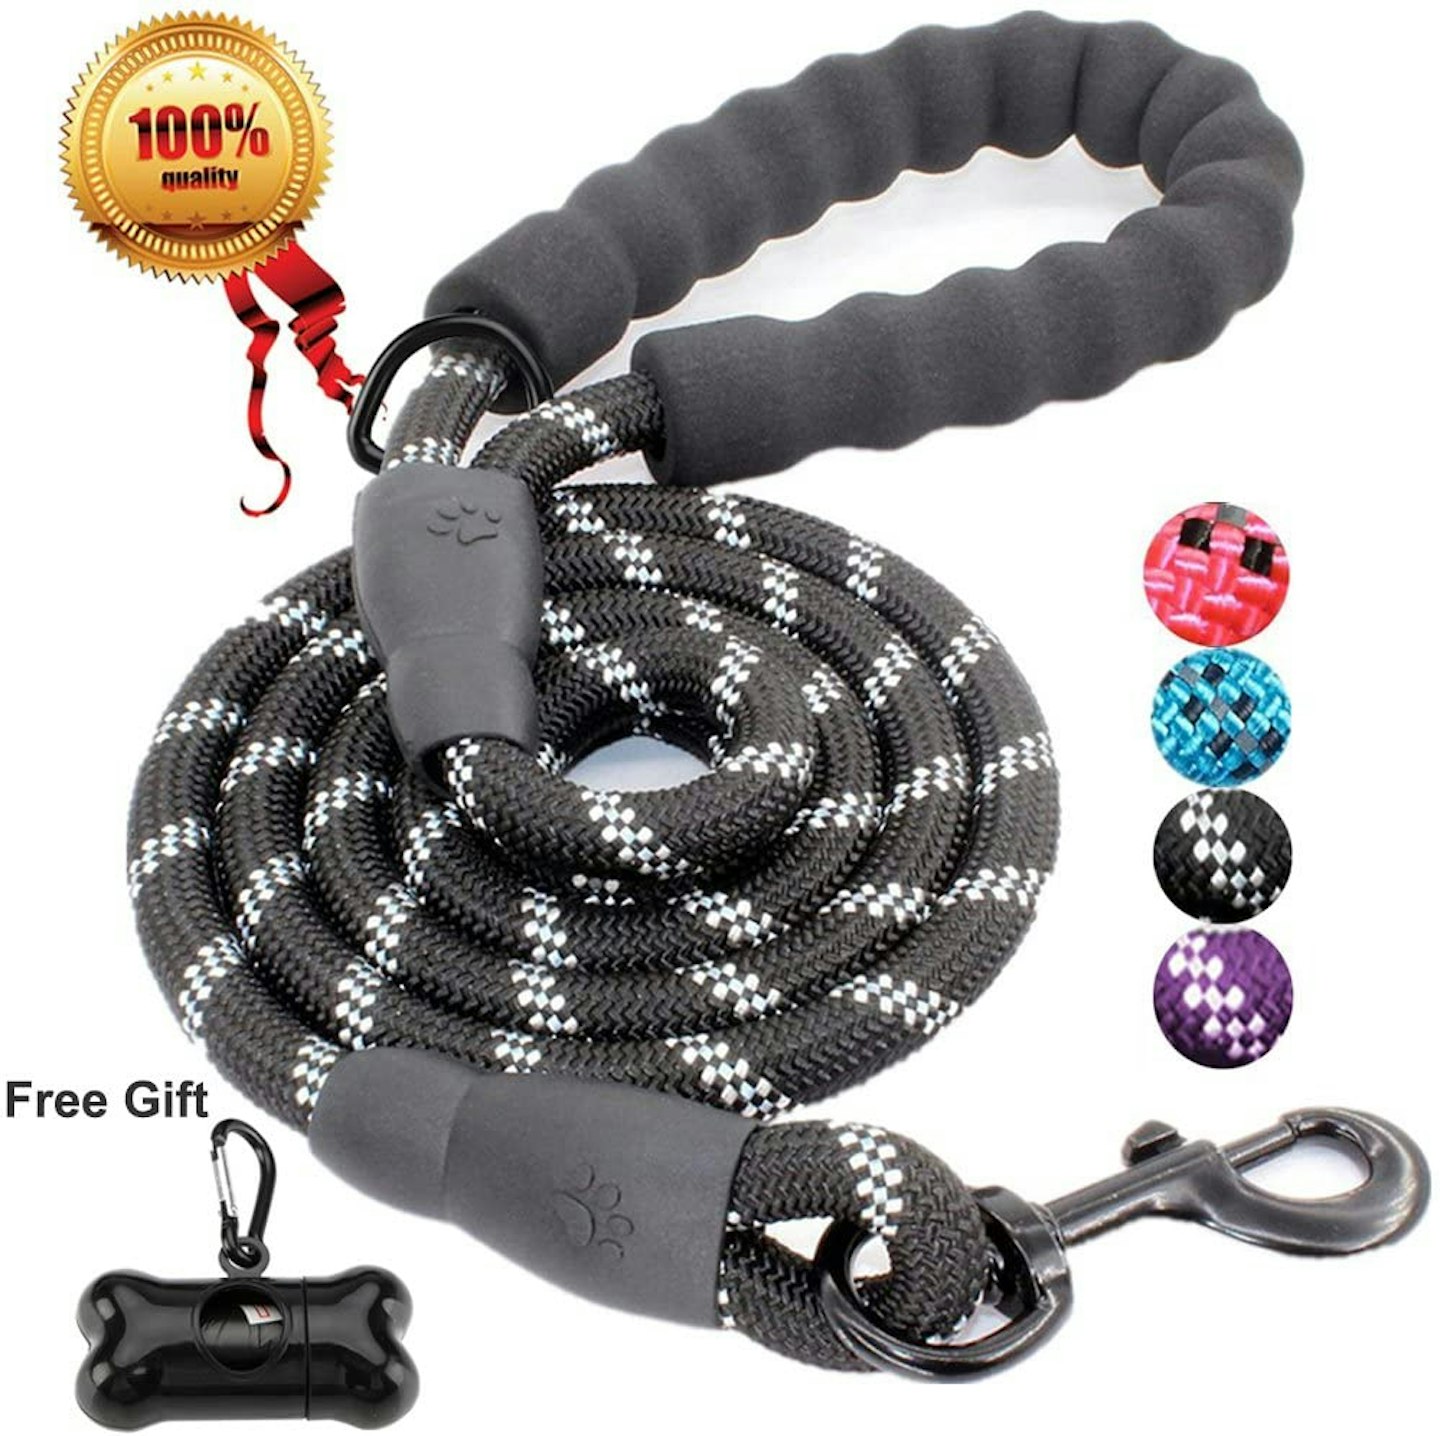 JBYAMUK 5 FT Strong Dog Lead with Comfortable Padded Handle